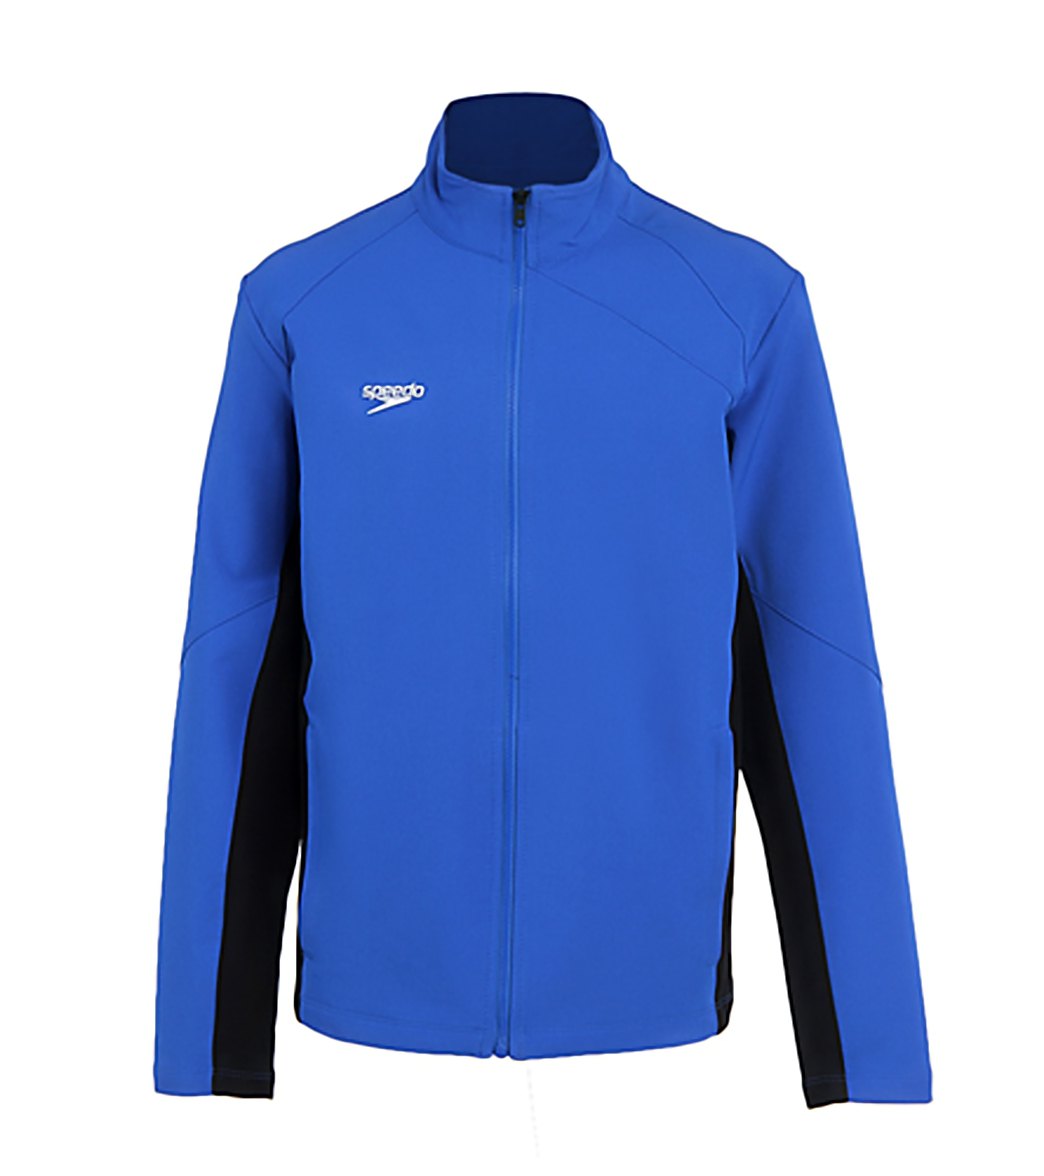 Speedo Youth Boom Force Warm Up Jacket at SwimOutlet.com - Free Shipping